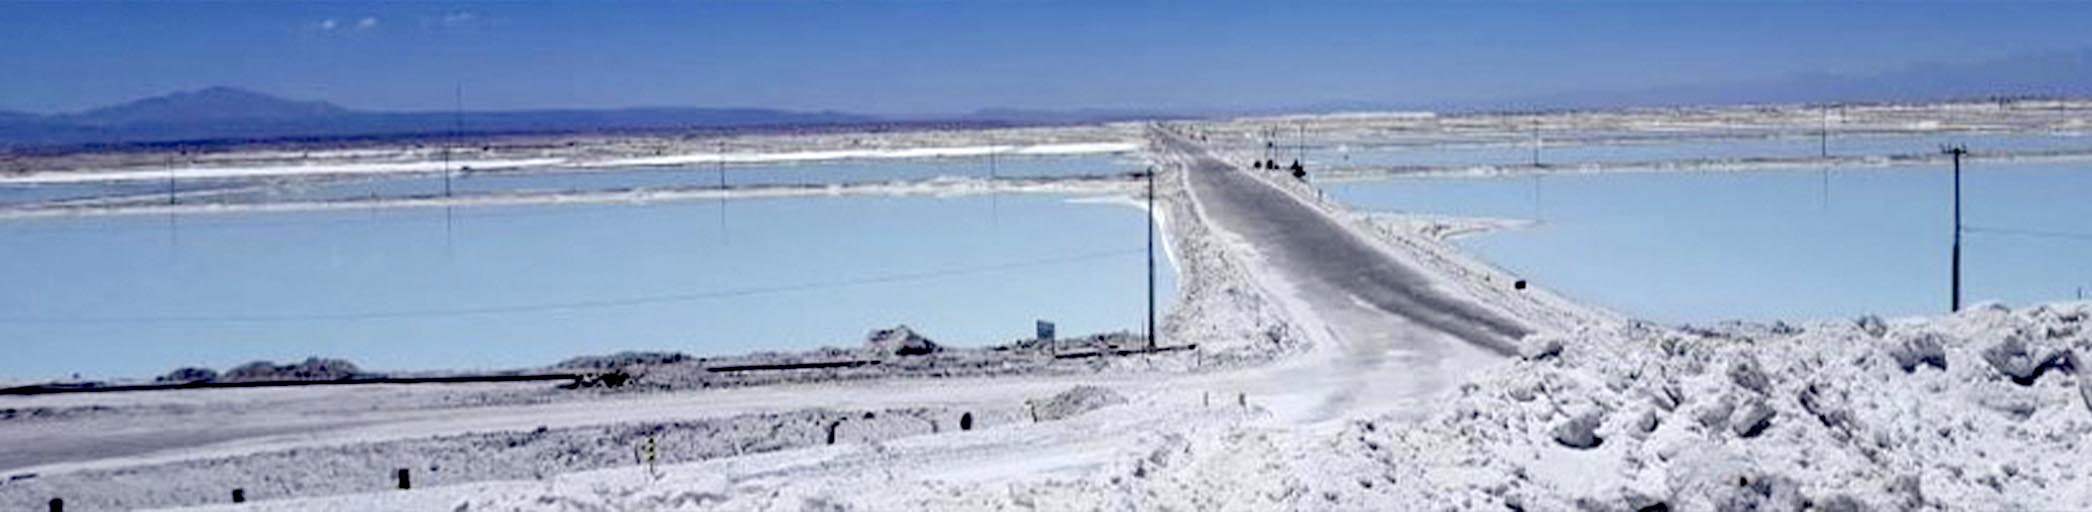 Monti Lithium Project